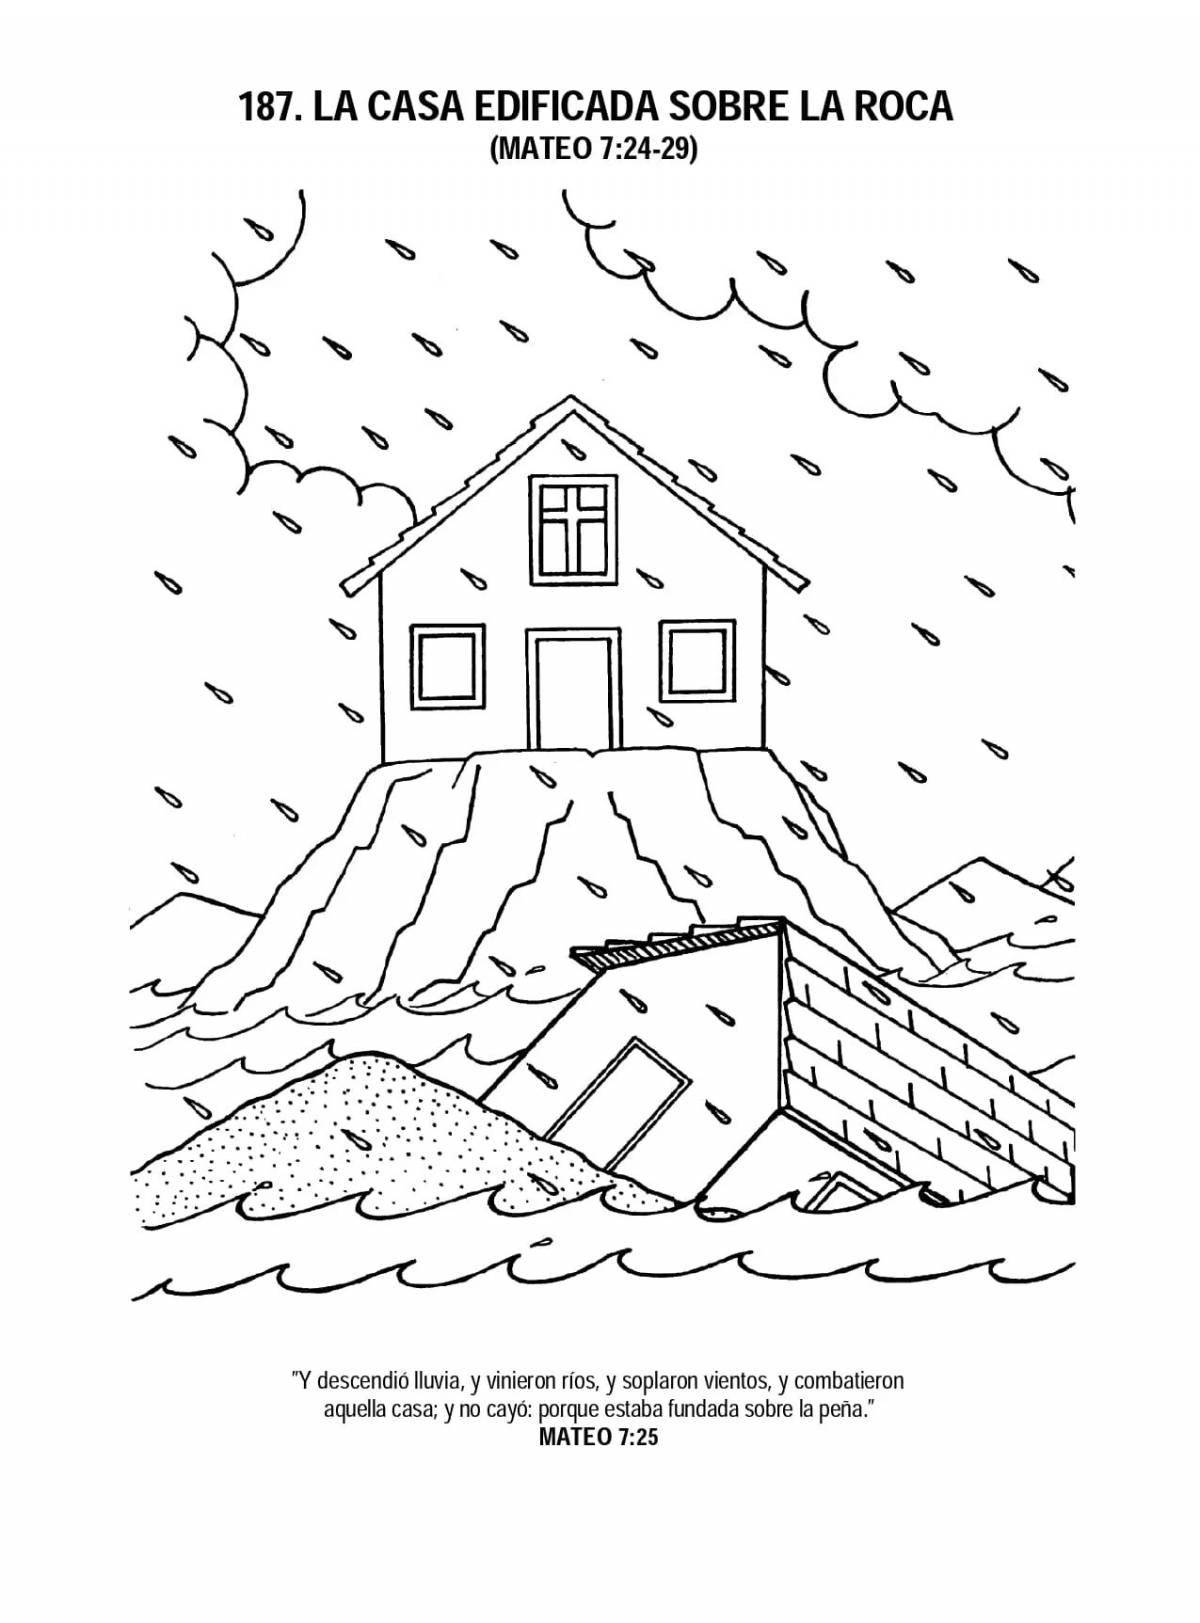 Earthquake coloring page